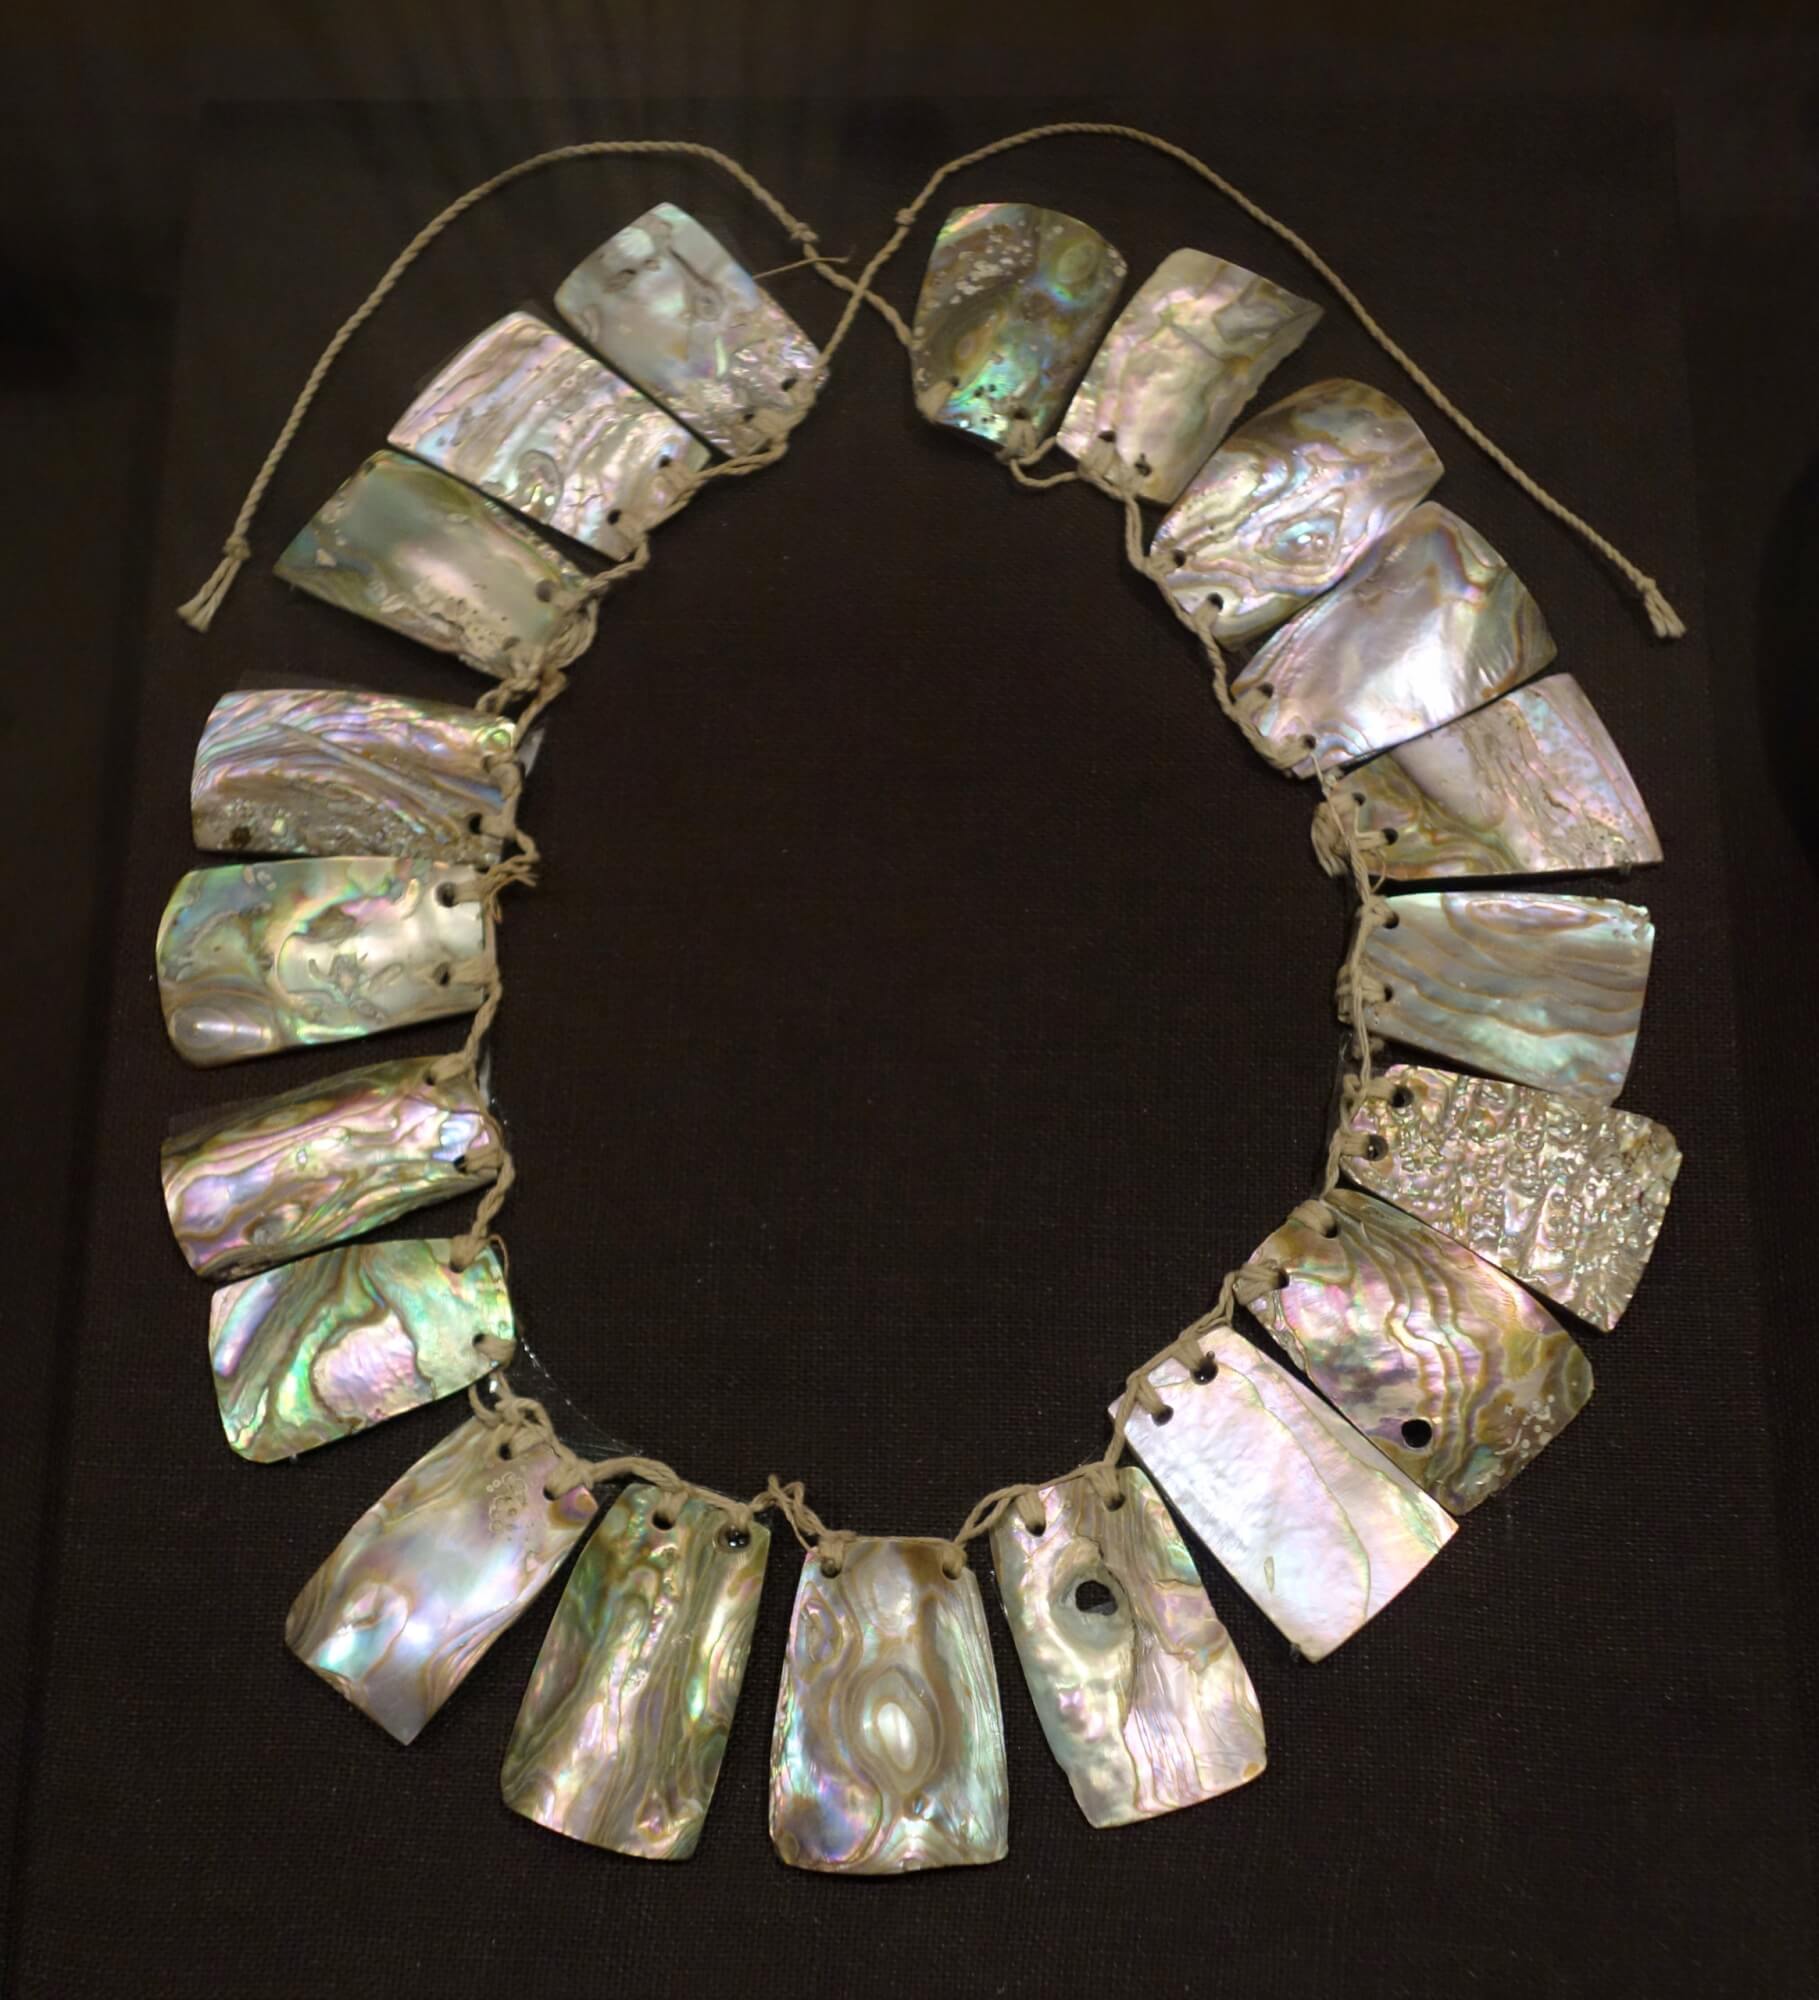 Image showcasing a Miwok Abalone Necklace from the Oakland Museum